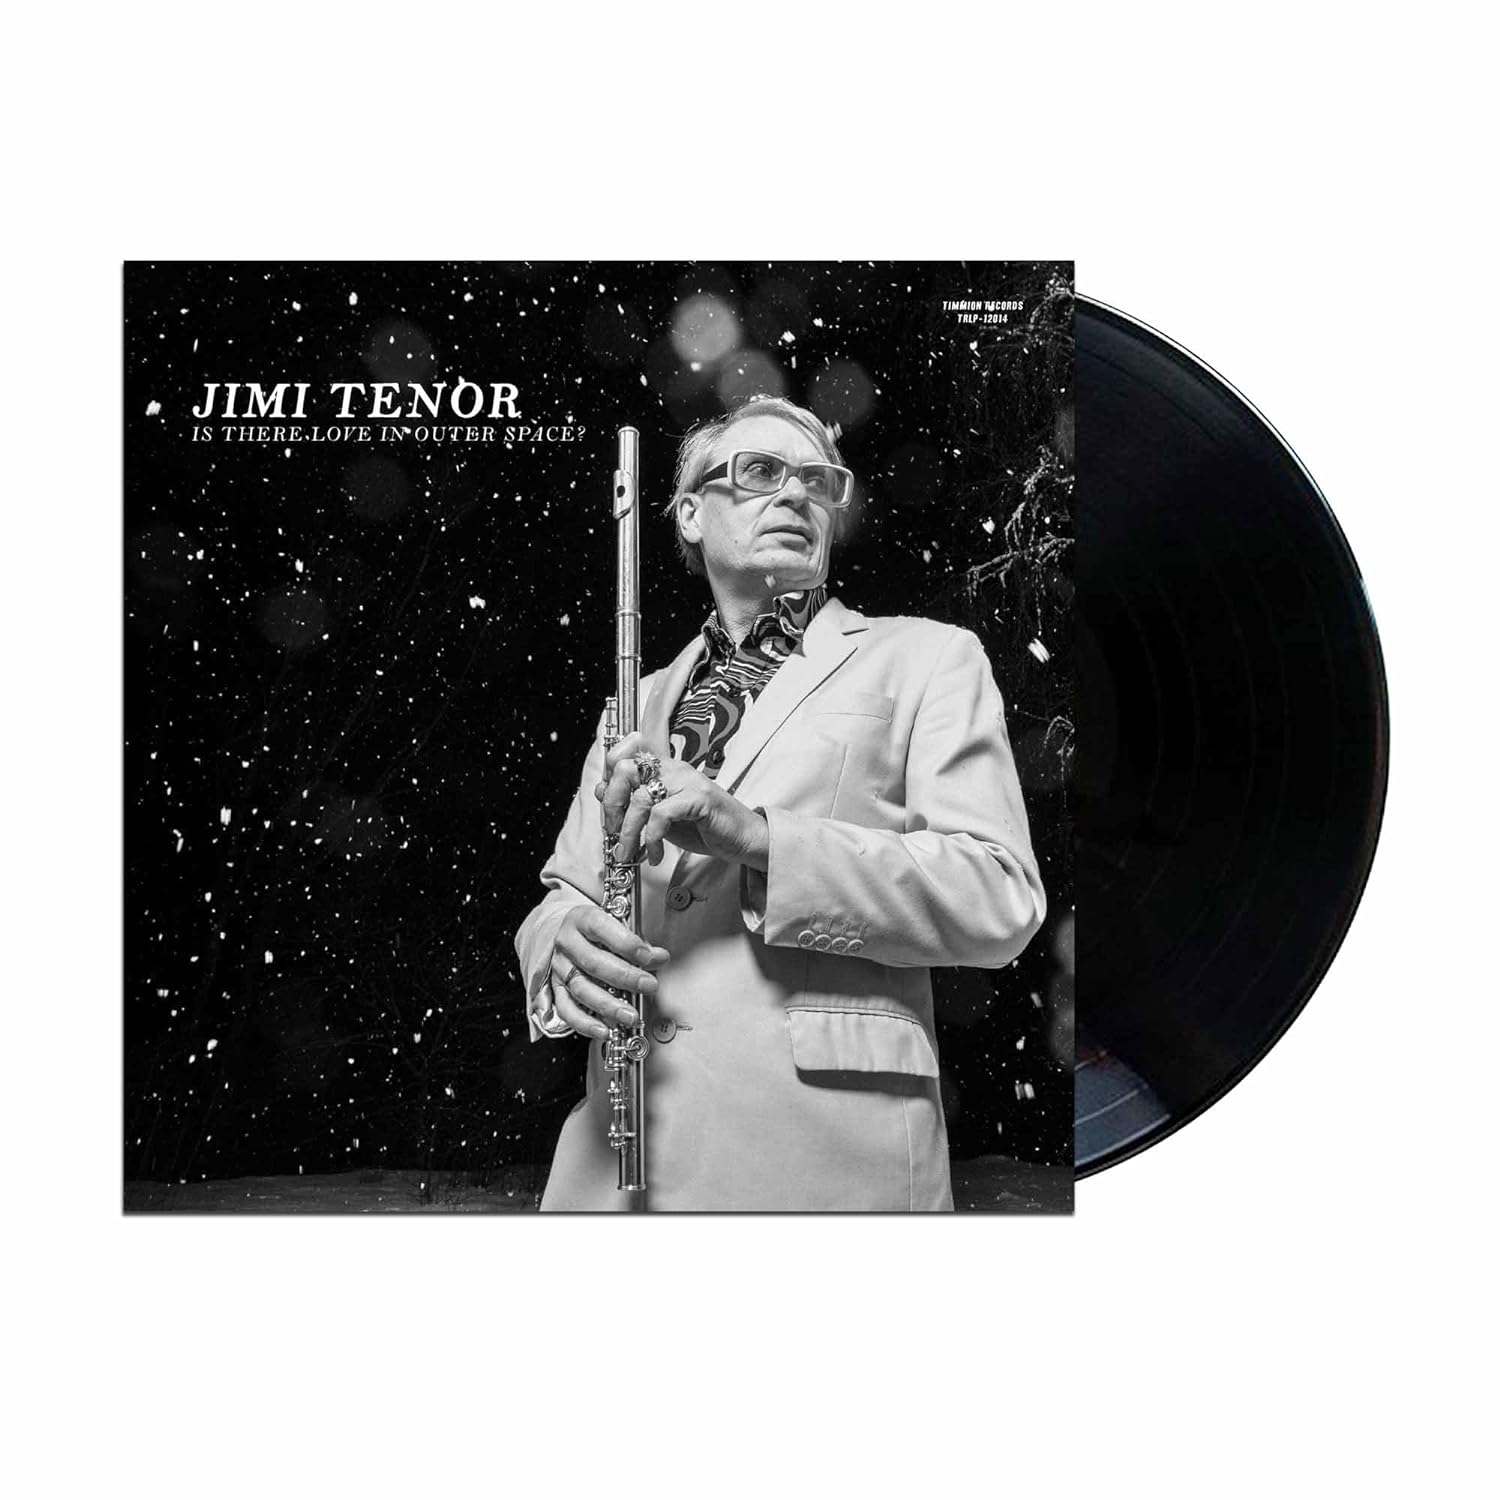 TENOR JIMI – IS THERE LOVE IN OUTER SPACE? LP